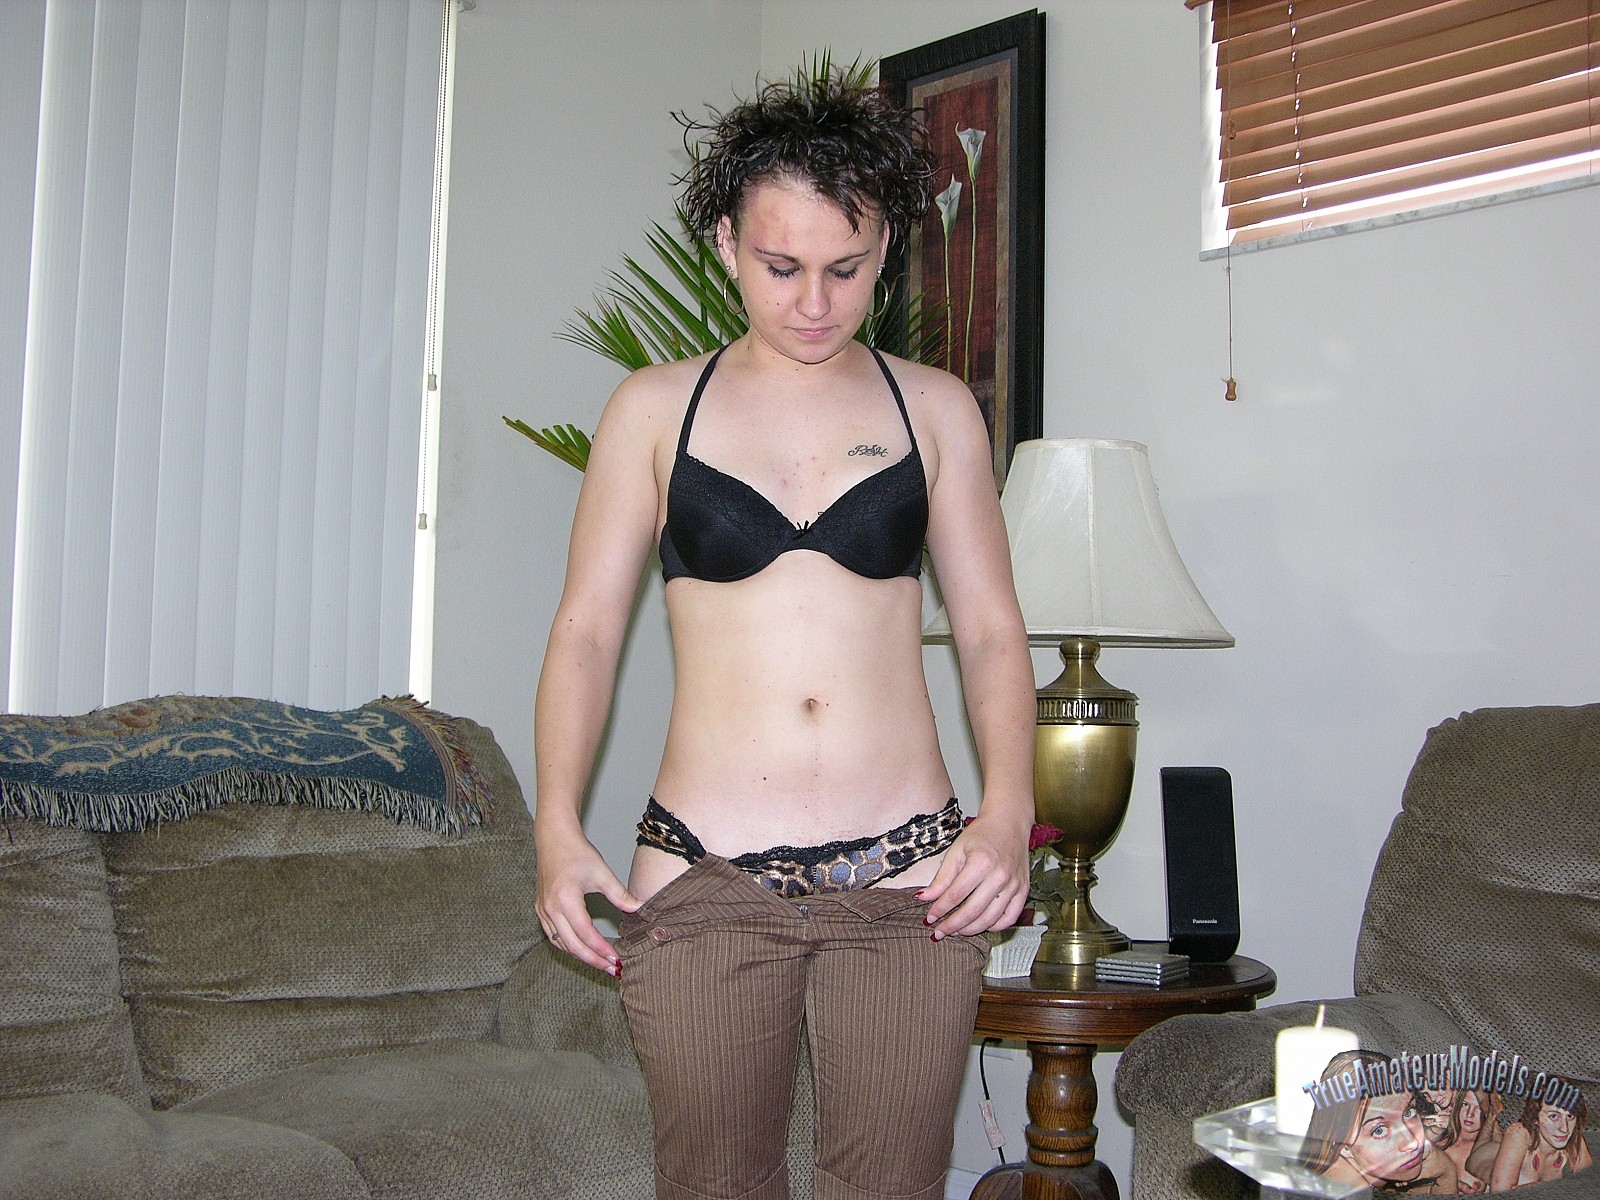 wpid-short-haired-amateur-nerd-baby-d-undresses-to-reveal-her-hairless-pussy3.jpg